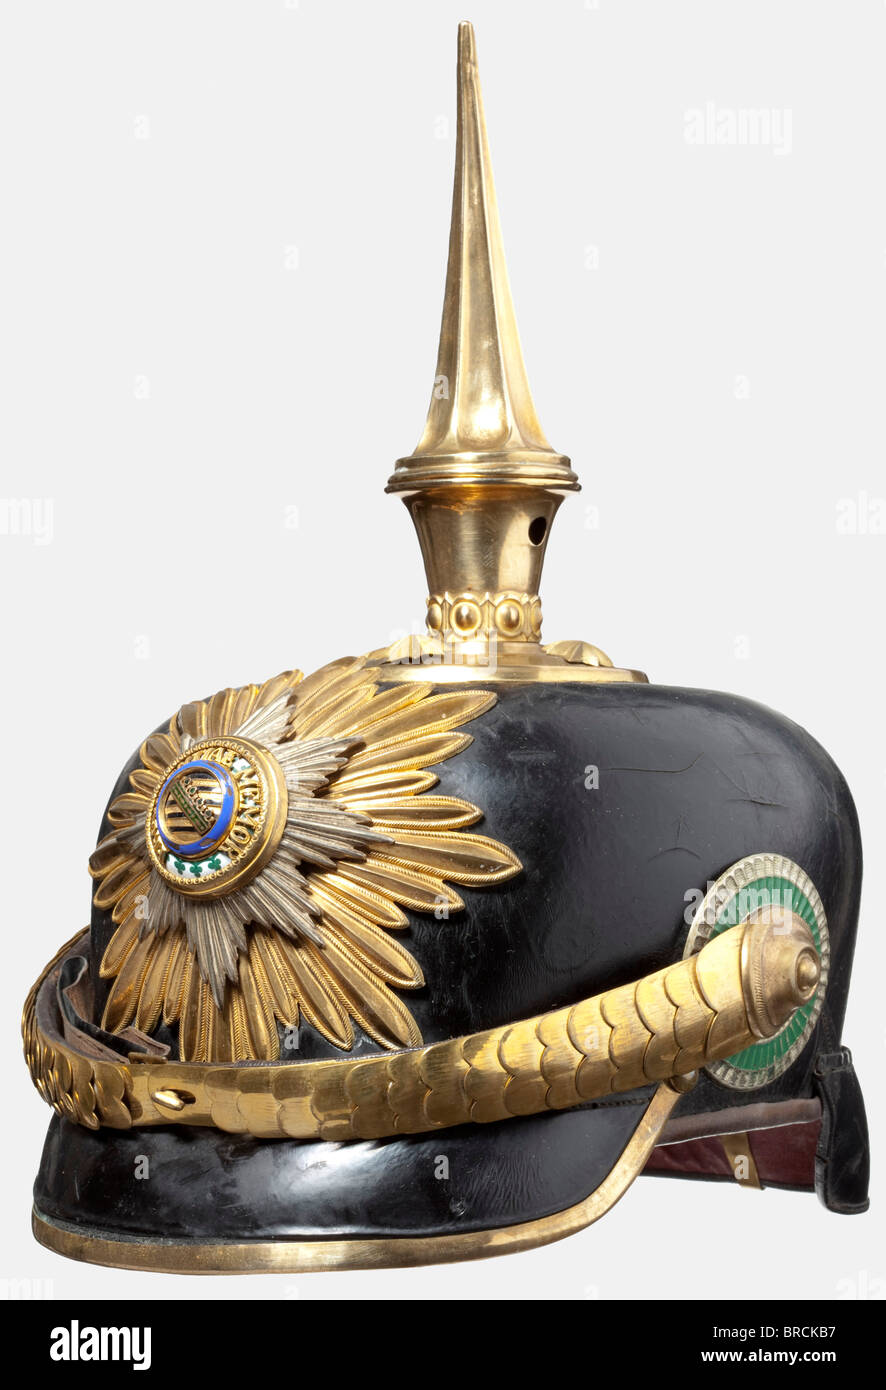 A helmet for general officers, of the Royal Saxon Army Leather body with gilt mountings, tall fluted spike. A silver, partly enamelled star with a small chip in the medallion ring set on the gilded star emblem. Convex gilt metal chinscales. Saxon style cockade. Yellow silk lining. It comes with the protective case. Cracks in the lacquer due to age, and an old pair of holes in the area of the emblem (helmet upgraded upon promotion). According to the consigner, the helmet derives from the possessions of General von der Decken. historic, historical, 19th century, , Stock Photo